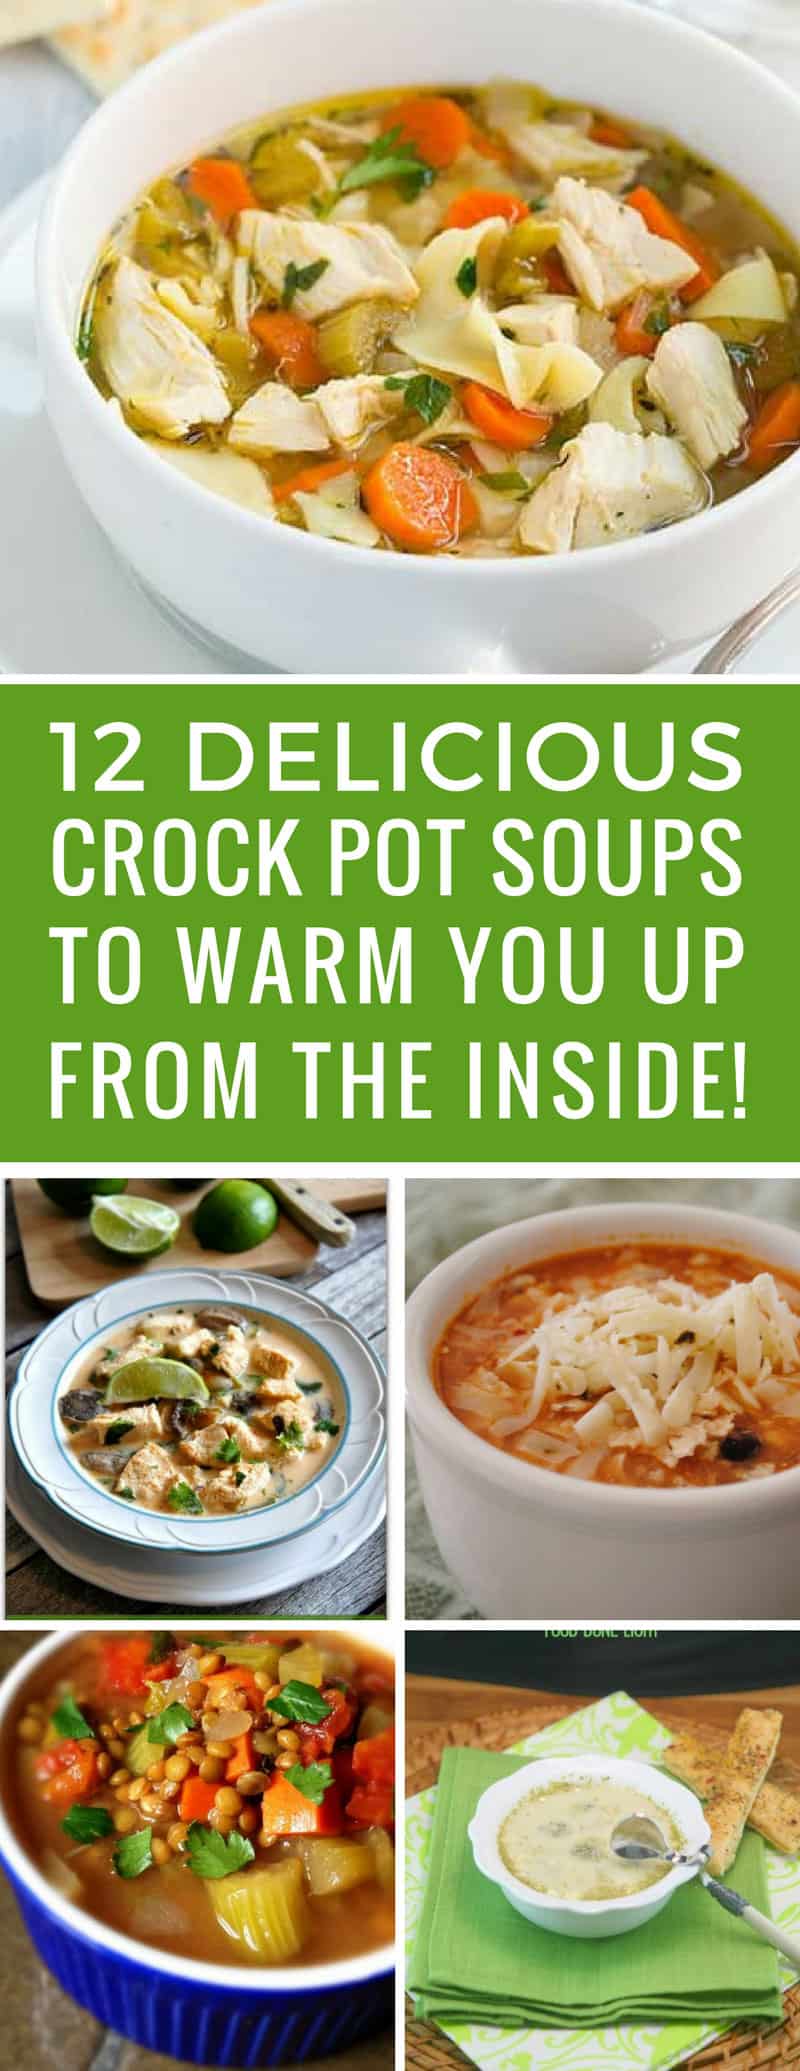 Yum these crock pot soups are so easy and the whole family enjoys them for lunch and dinner! Thanks for sharing!